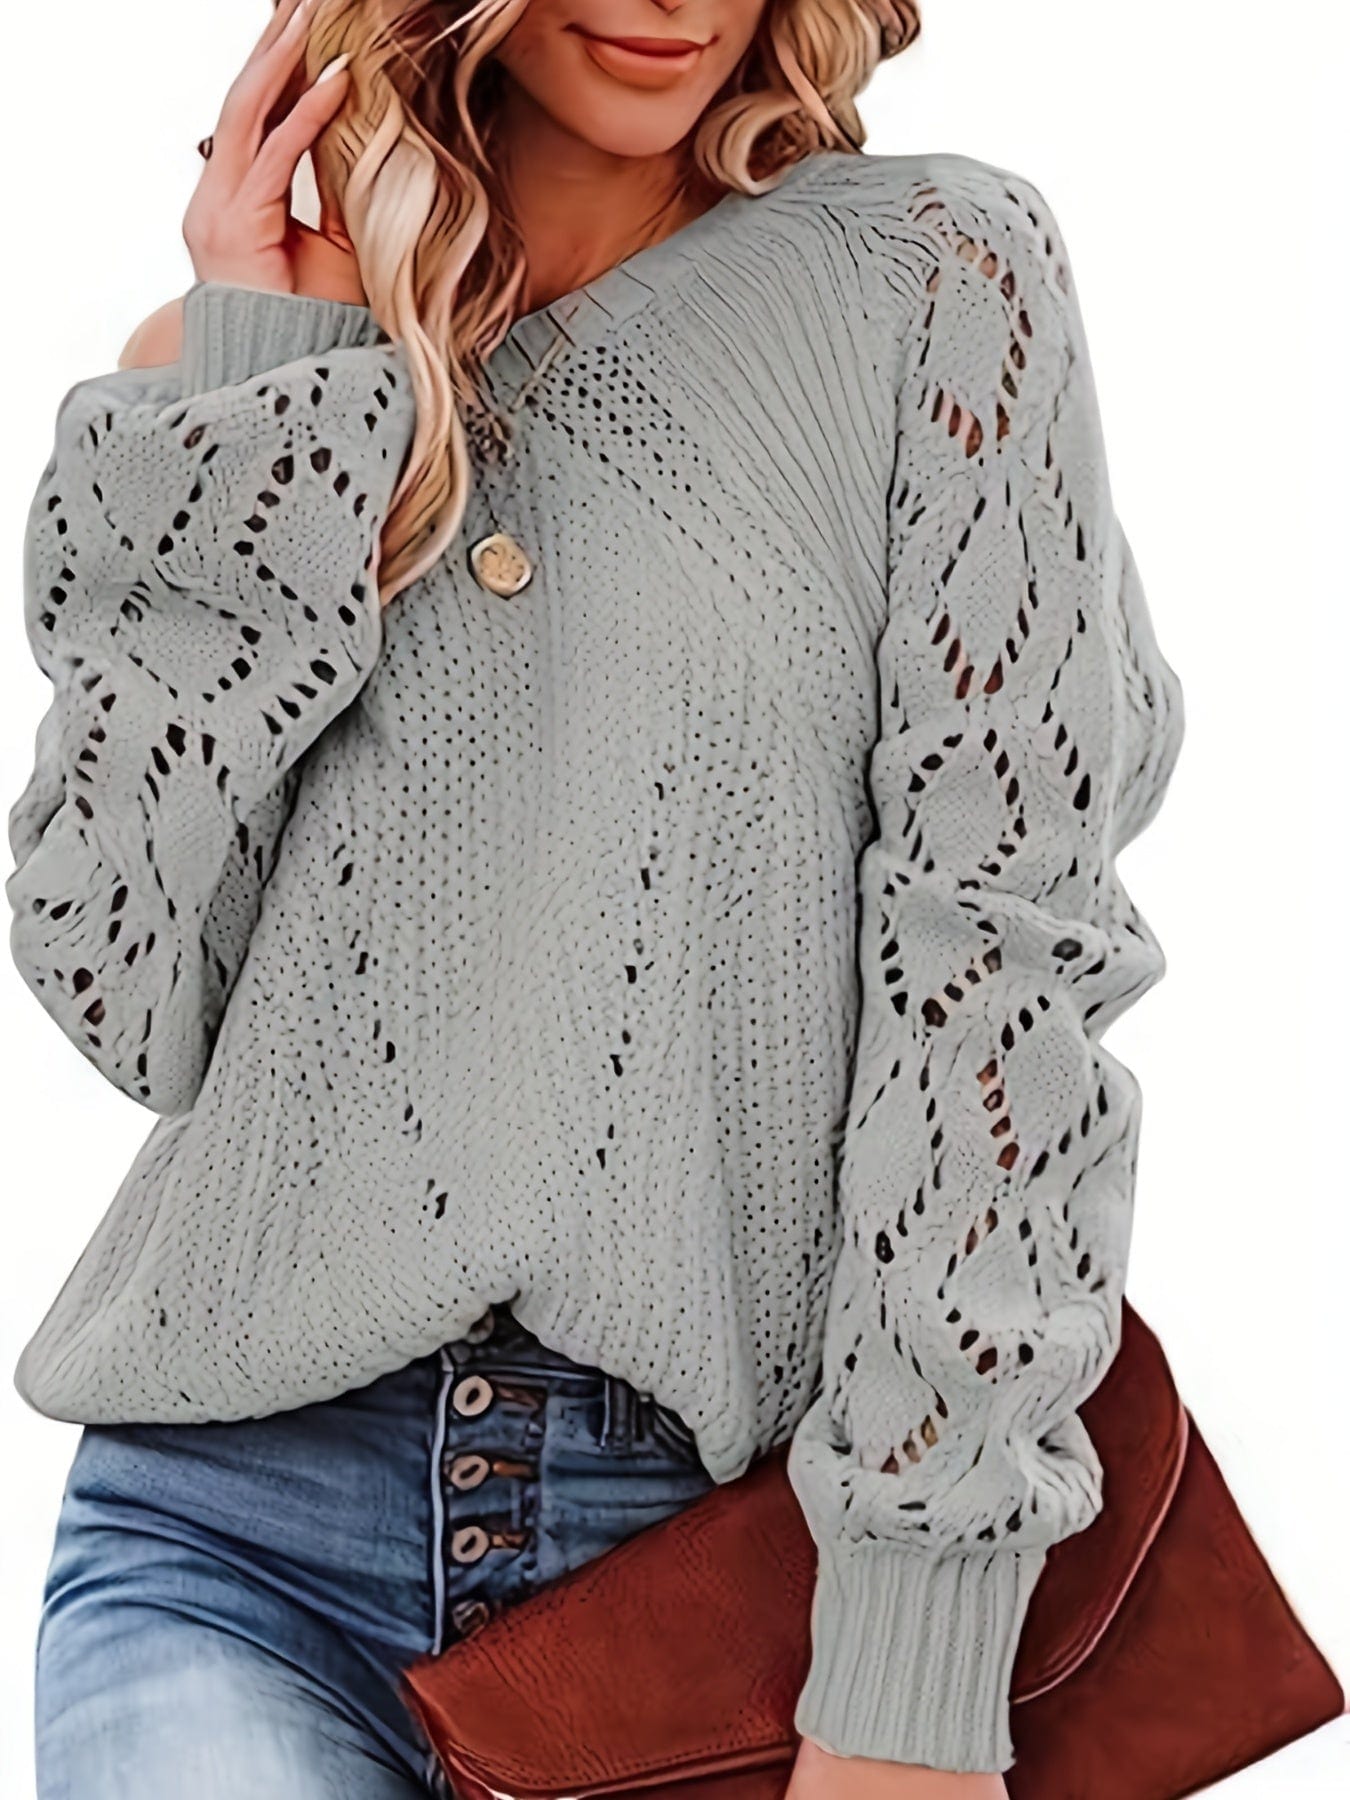 Plus Size Casual Sweater, Women's Plus Solid Eyelet Embroidered Lantern Sleeve Round Neck Slight Stretch Sweater PLU2309A3401SPG0XL(12) LightGray / 0XL(12)